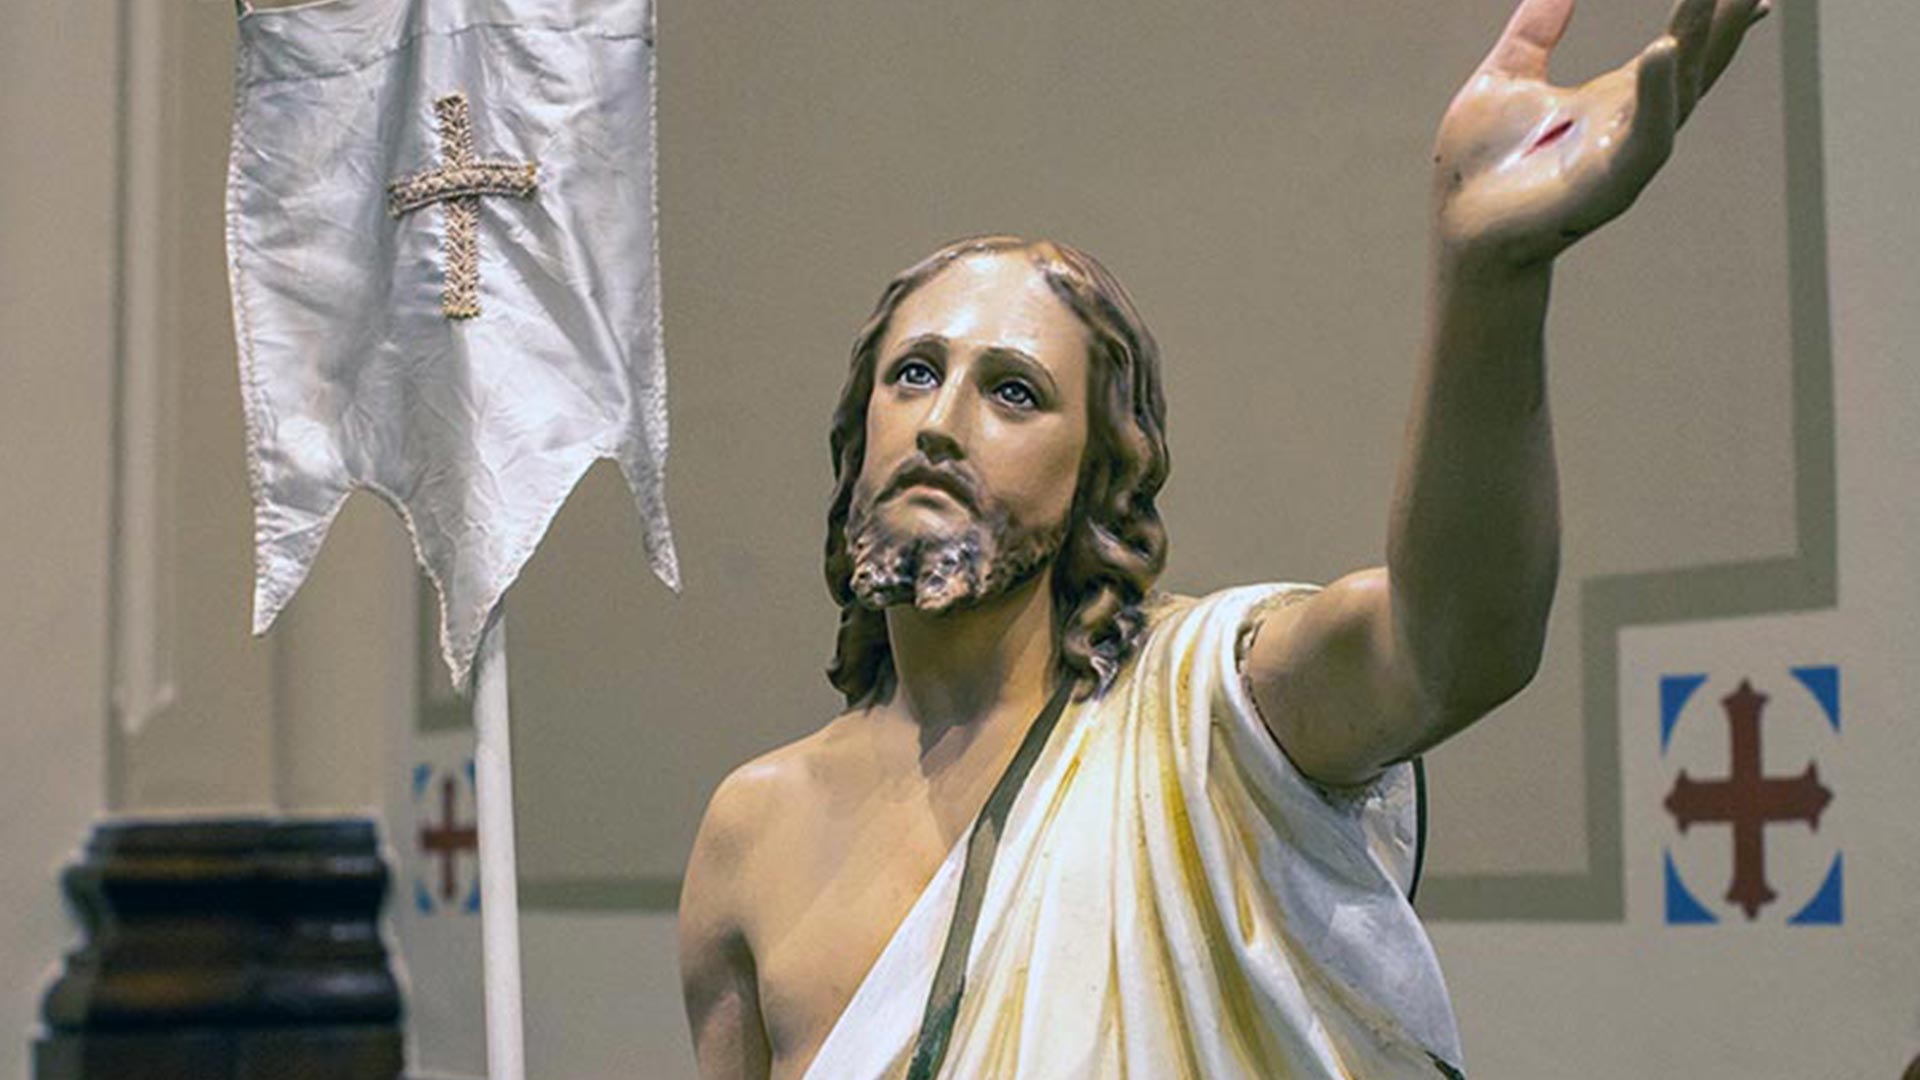 A statue of the resurrected Christ in the sanctuary of St. Bonaventure Chapel